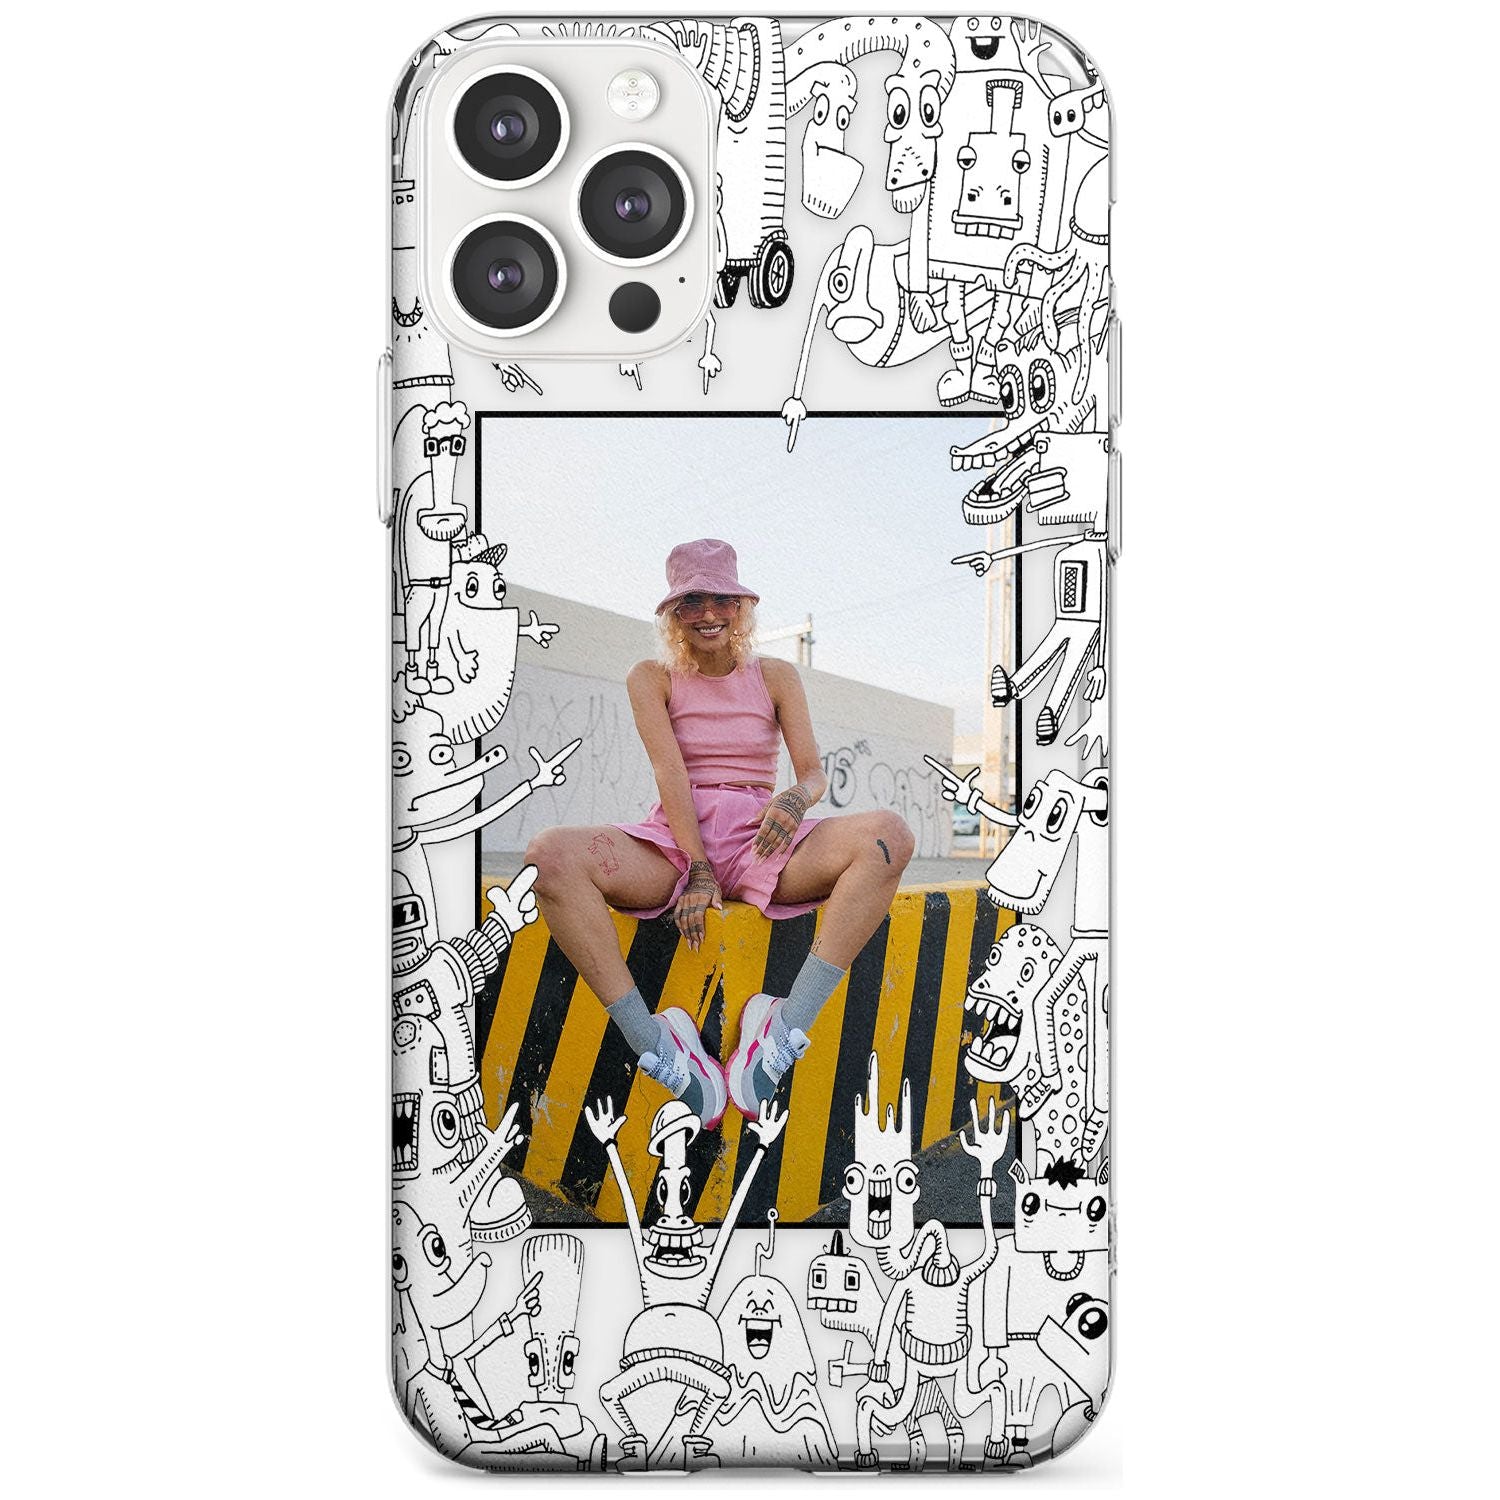 Personalised Look At This Photo Case Custom Phone Case iPhone 12 Pro Max / Clear Case,iPhone 12 Pro / Clear Case,iPhone 11 Pro Max / Clear Case,iPhone 11 Pro / Clear Case Blanc Space